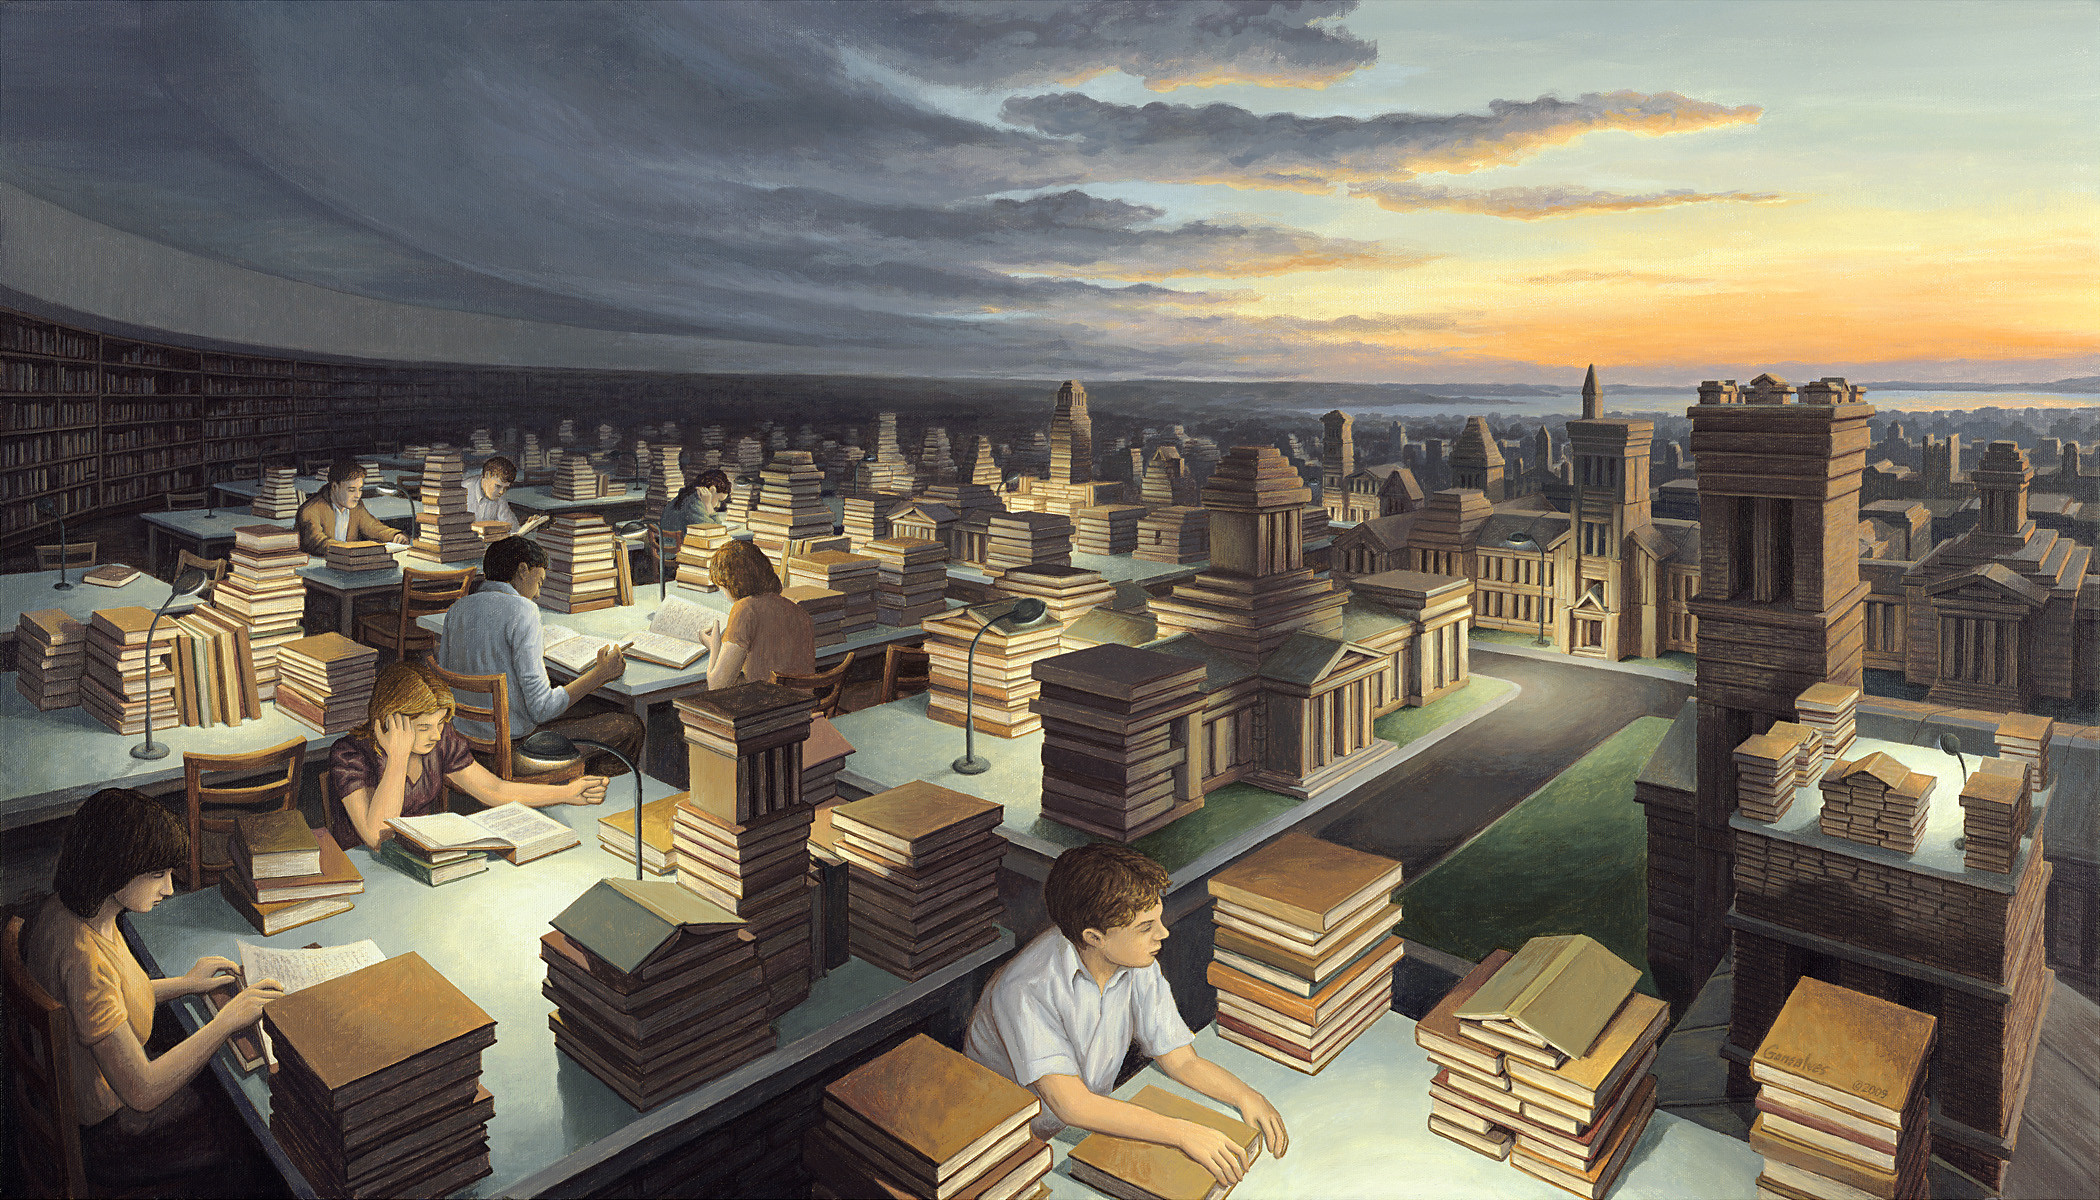 General 2100x1200 Rob Gonsalves surreal artwork library